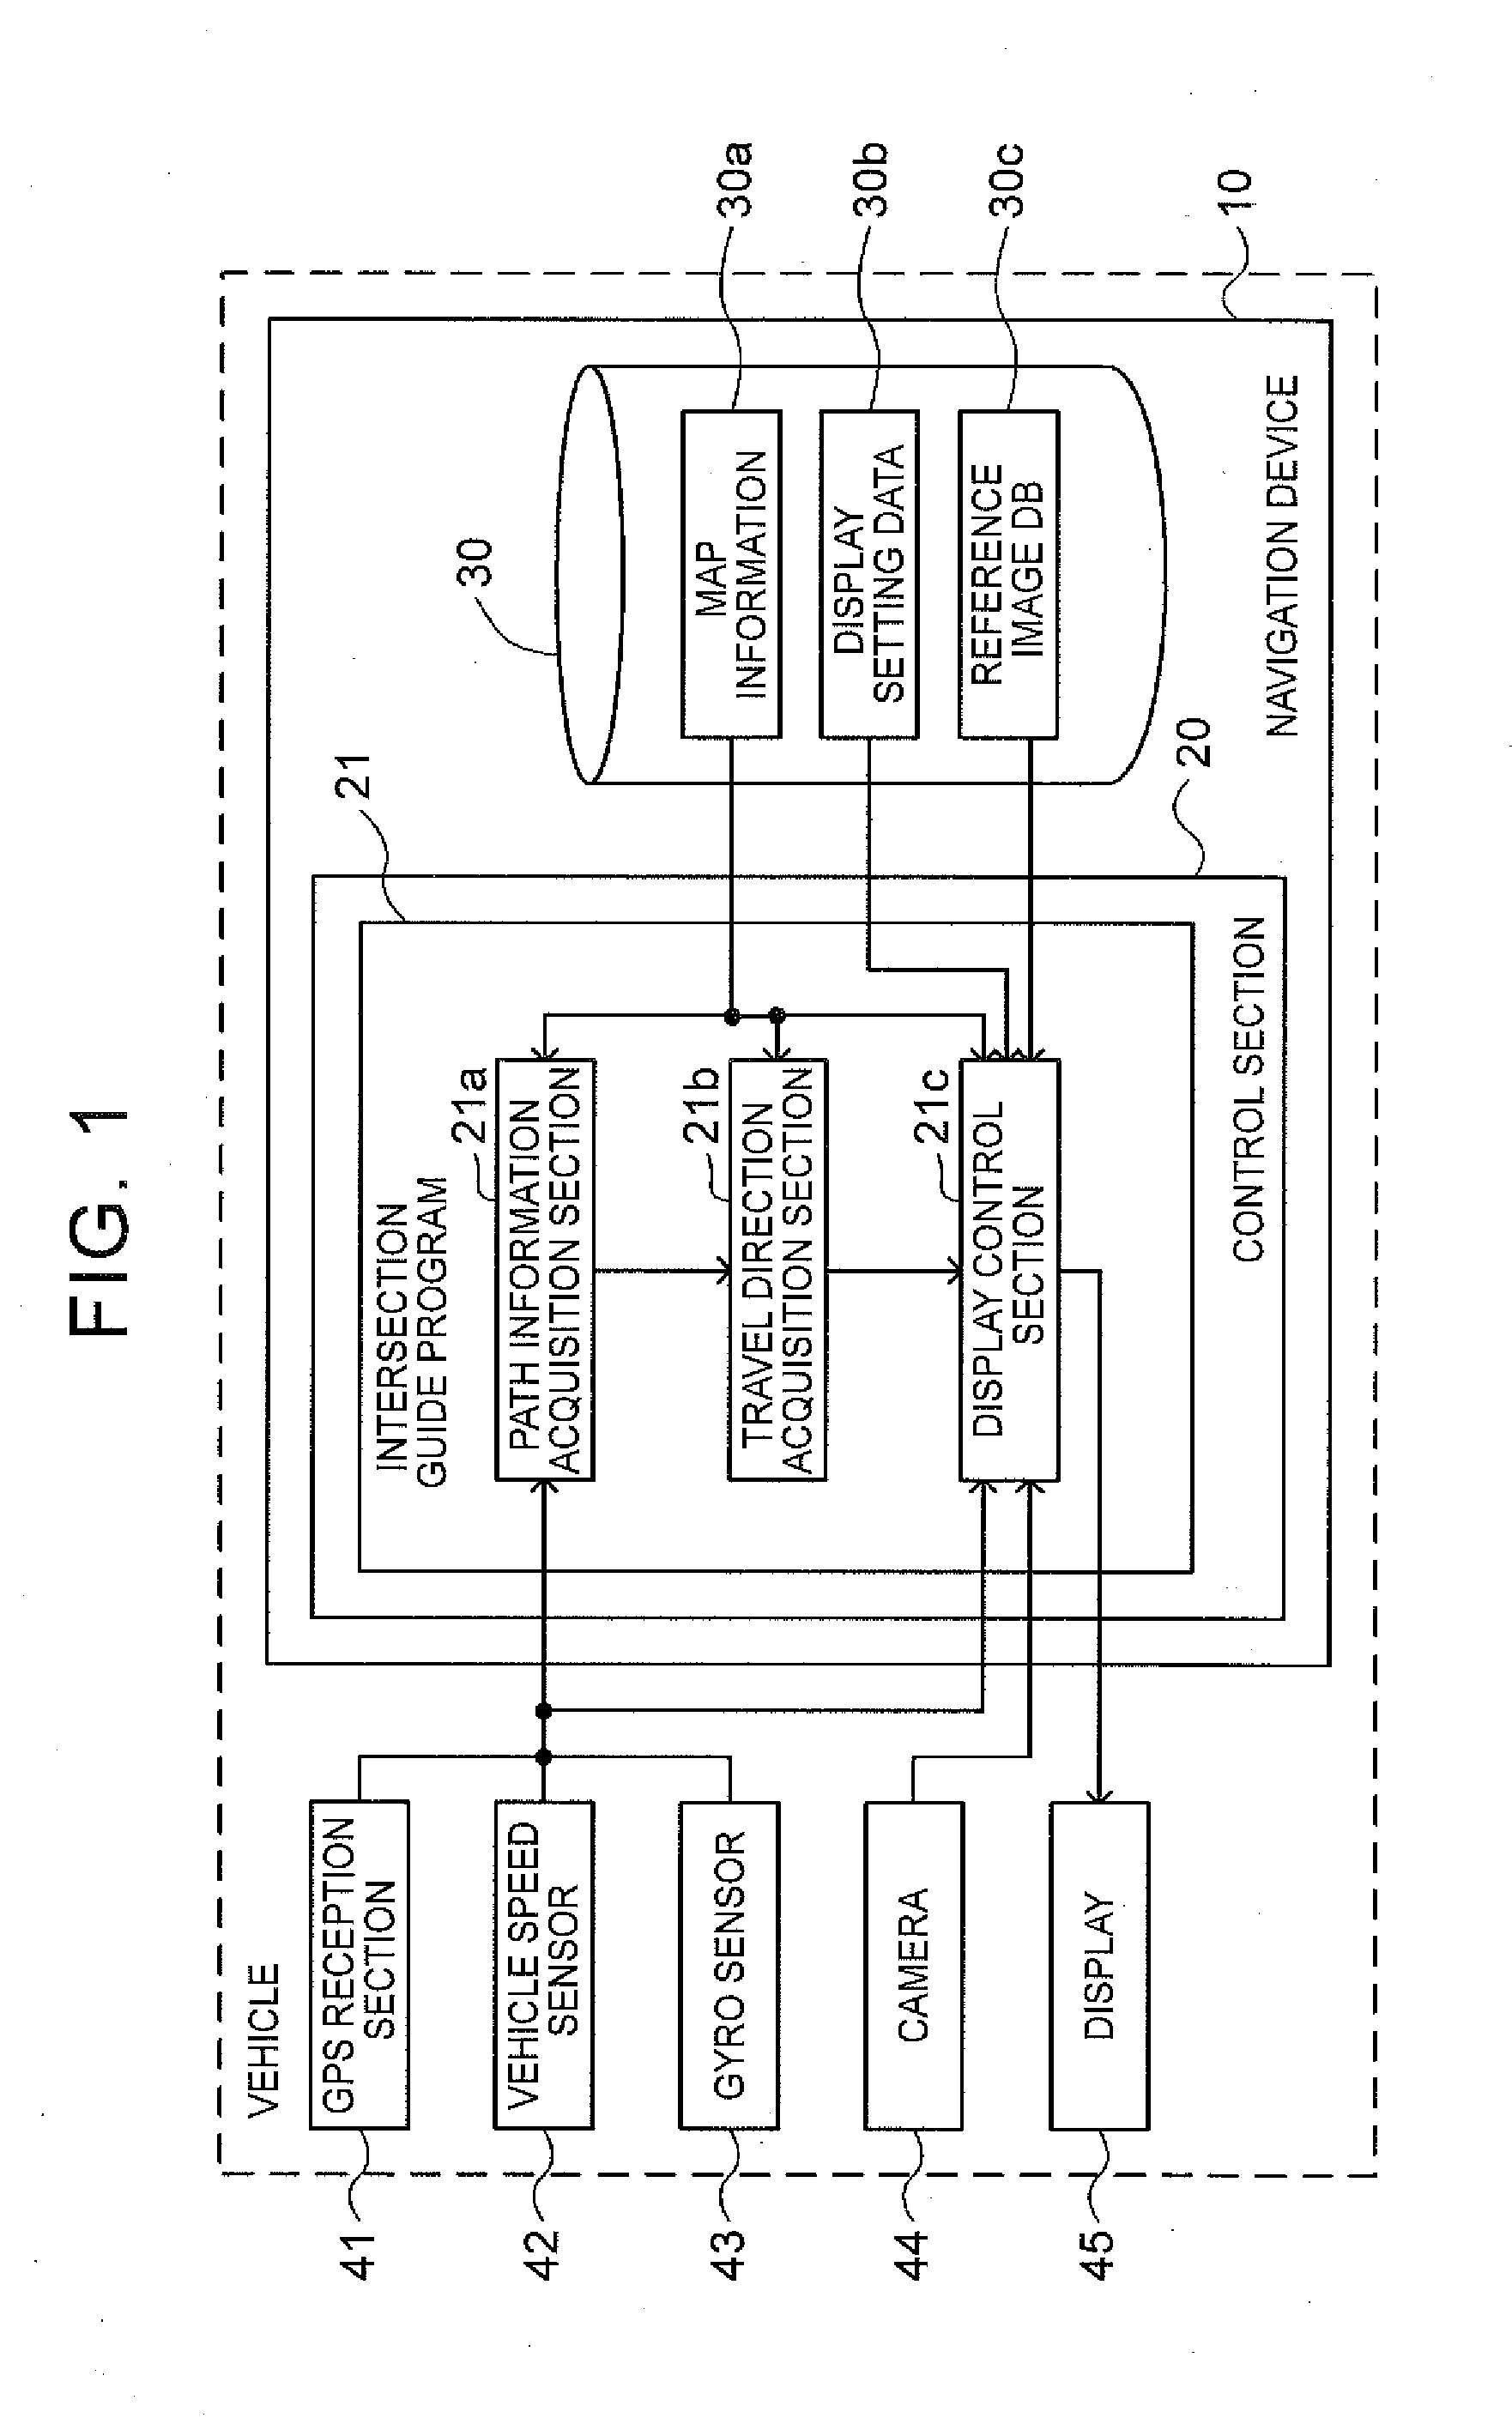 Intersection guide system, method, and program